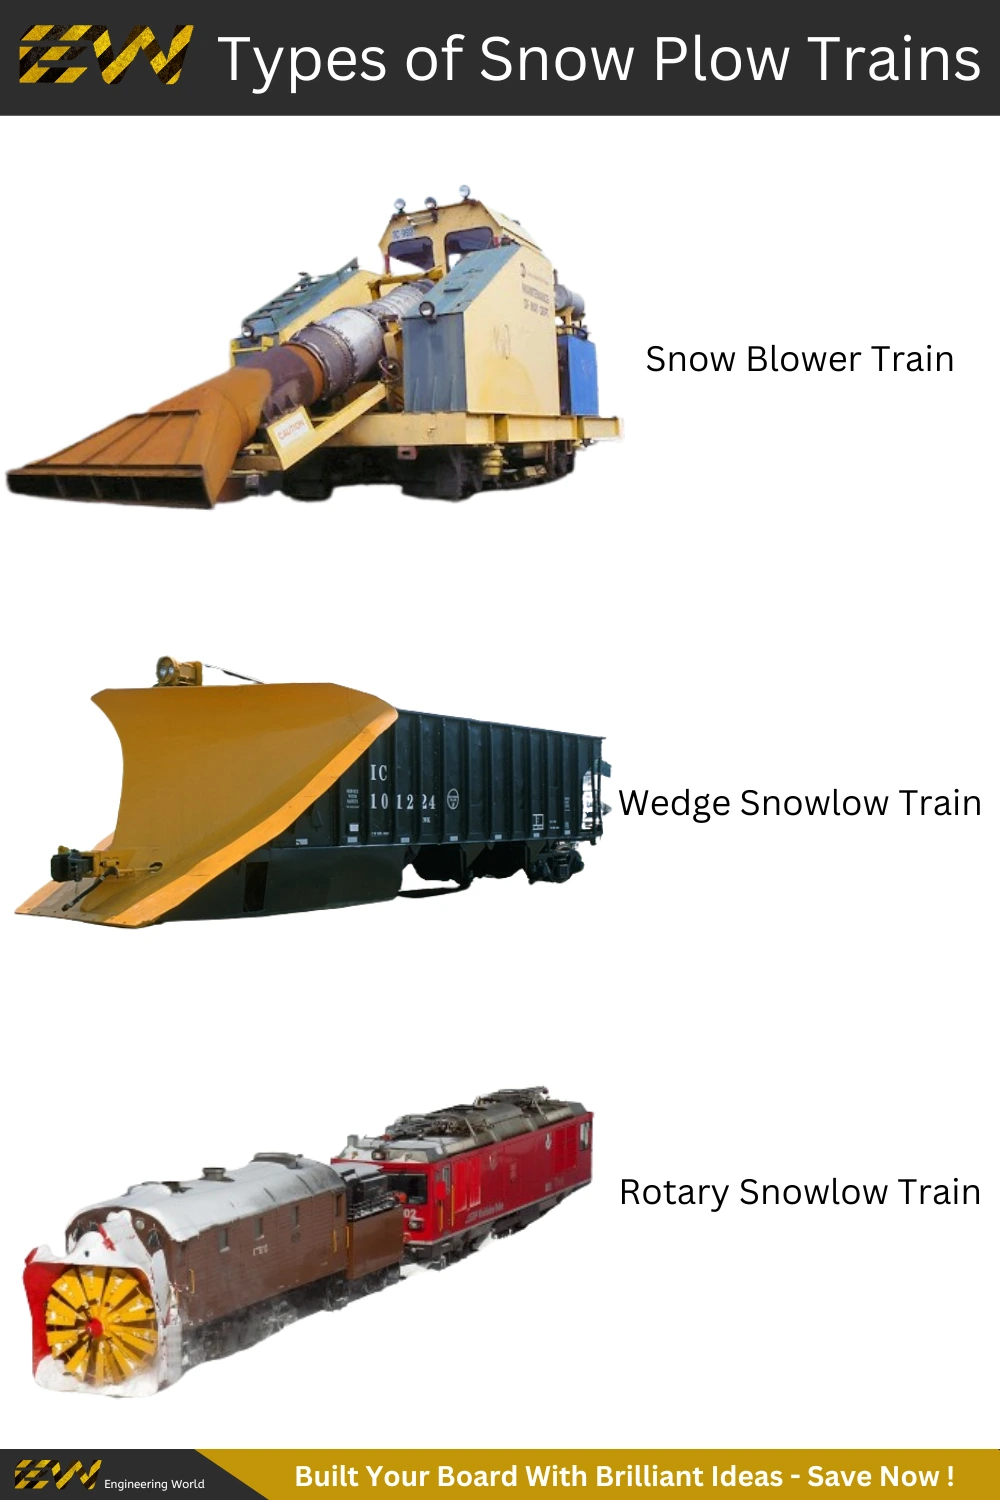 Different types of Snow Plow trains